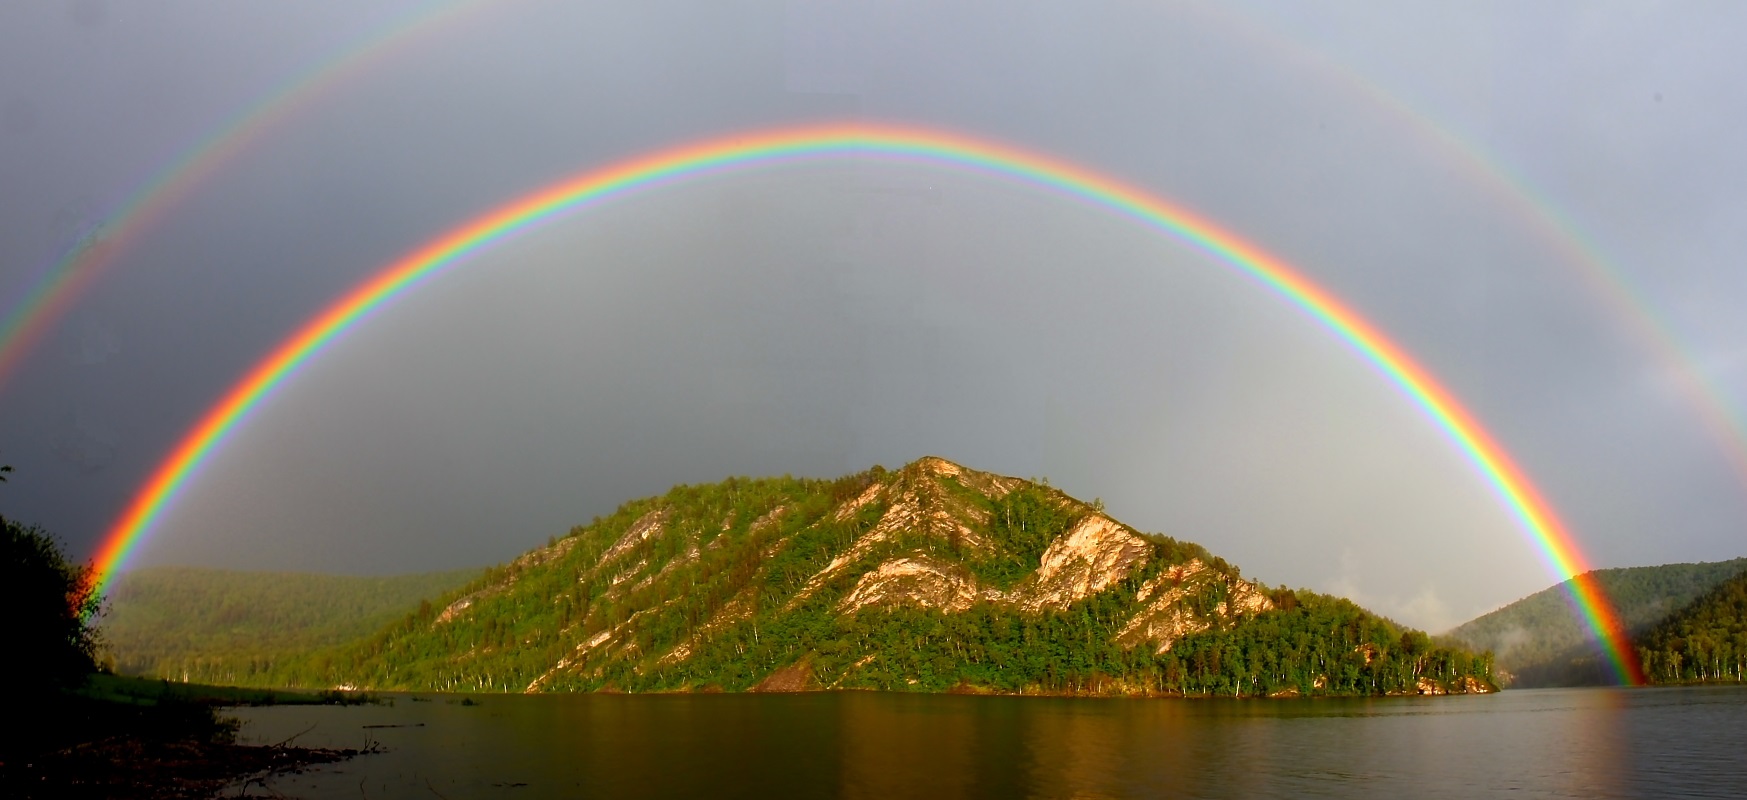 Double rainbow over the mountain by the lake